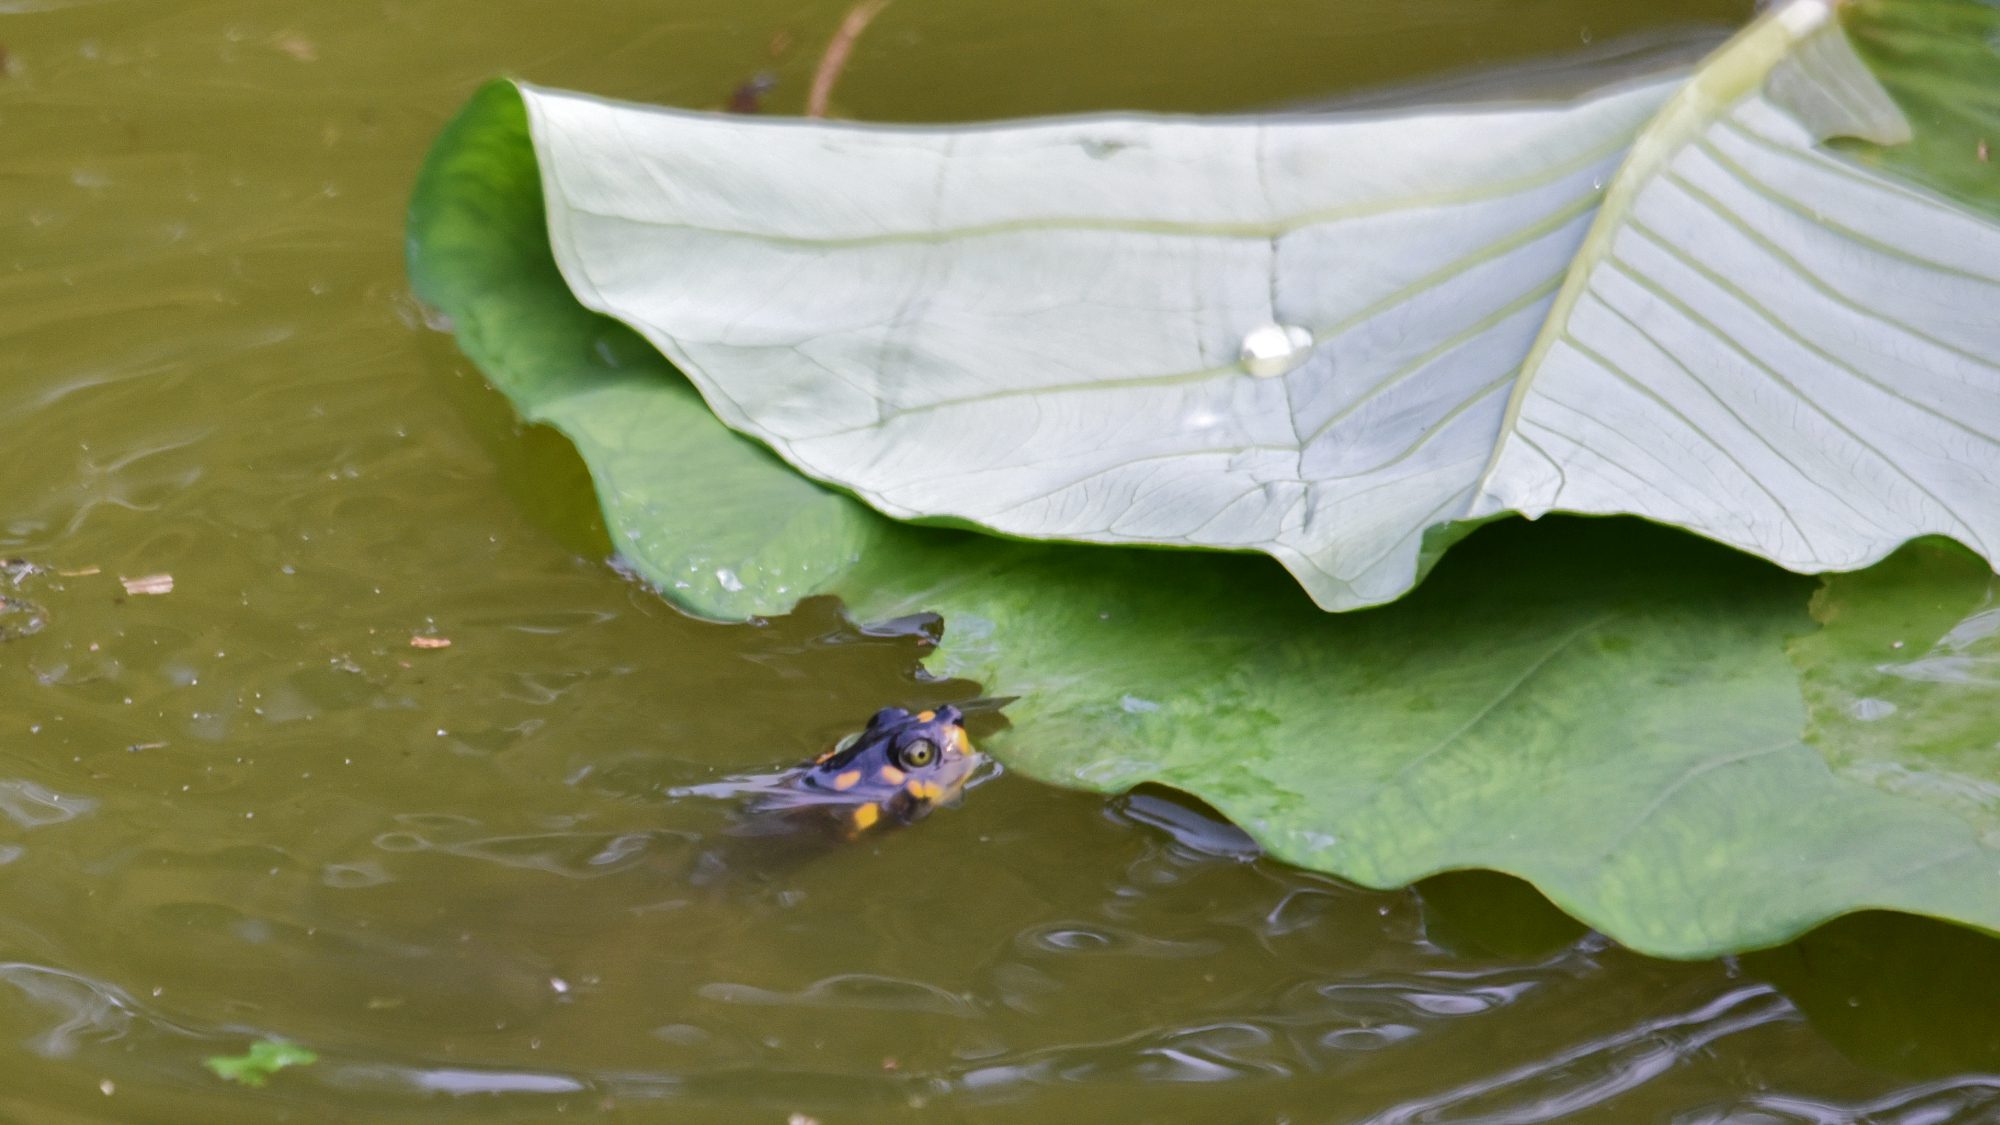 A baby Amazon turtle snacks on a leaf